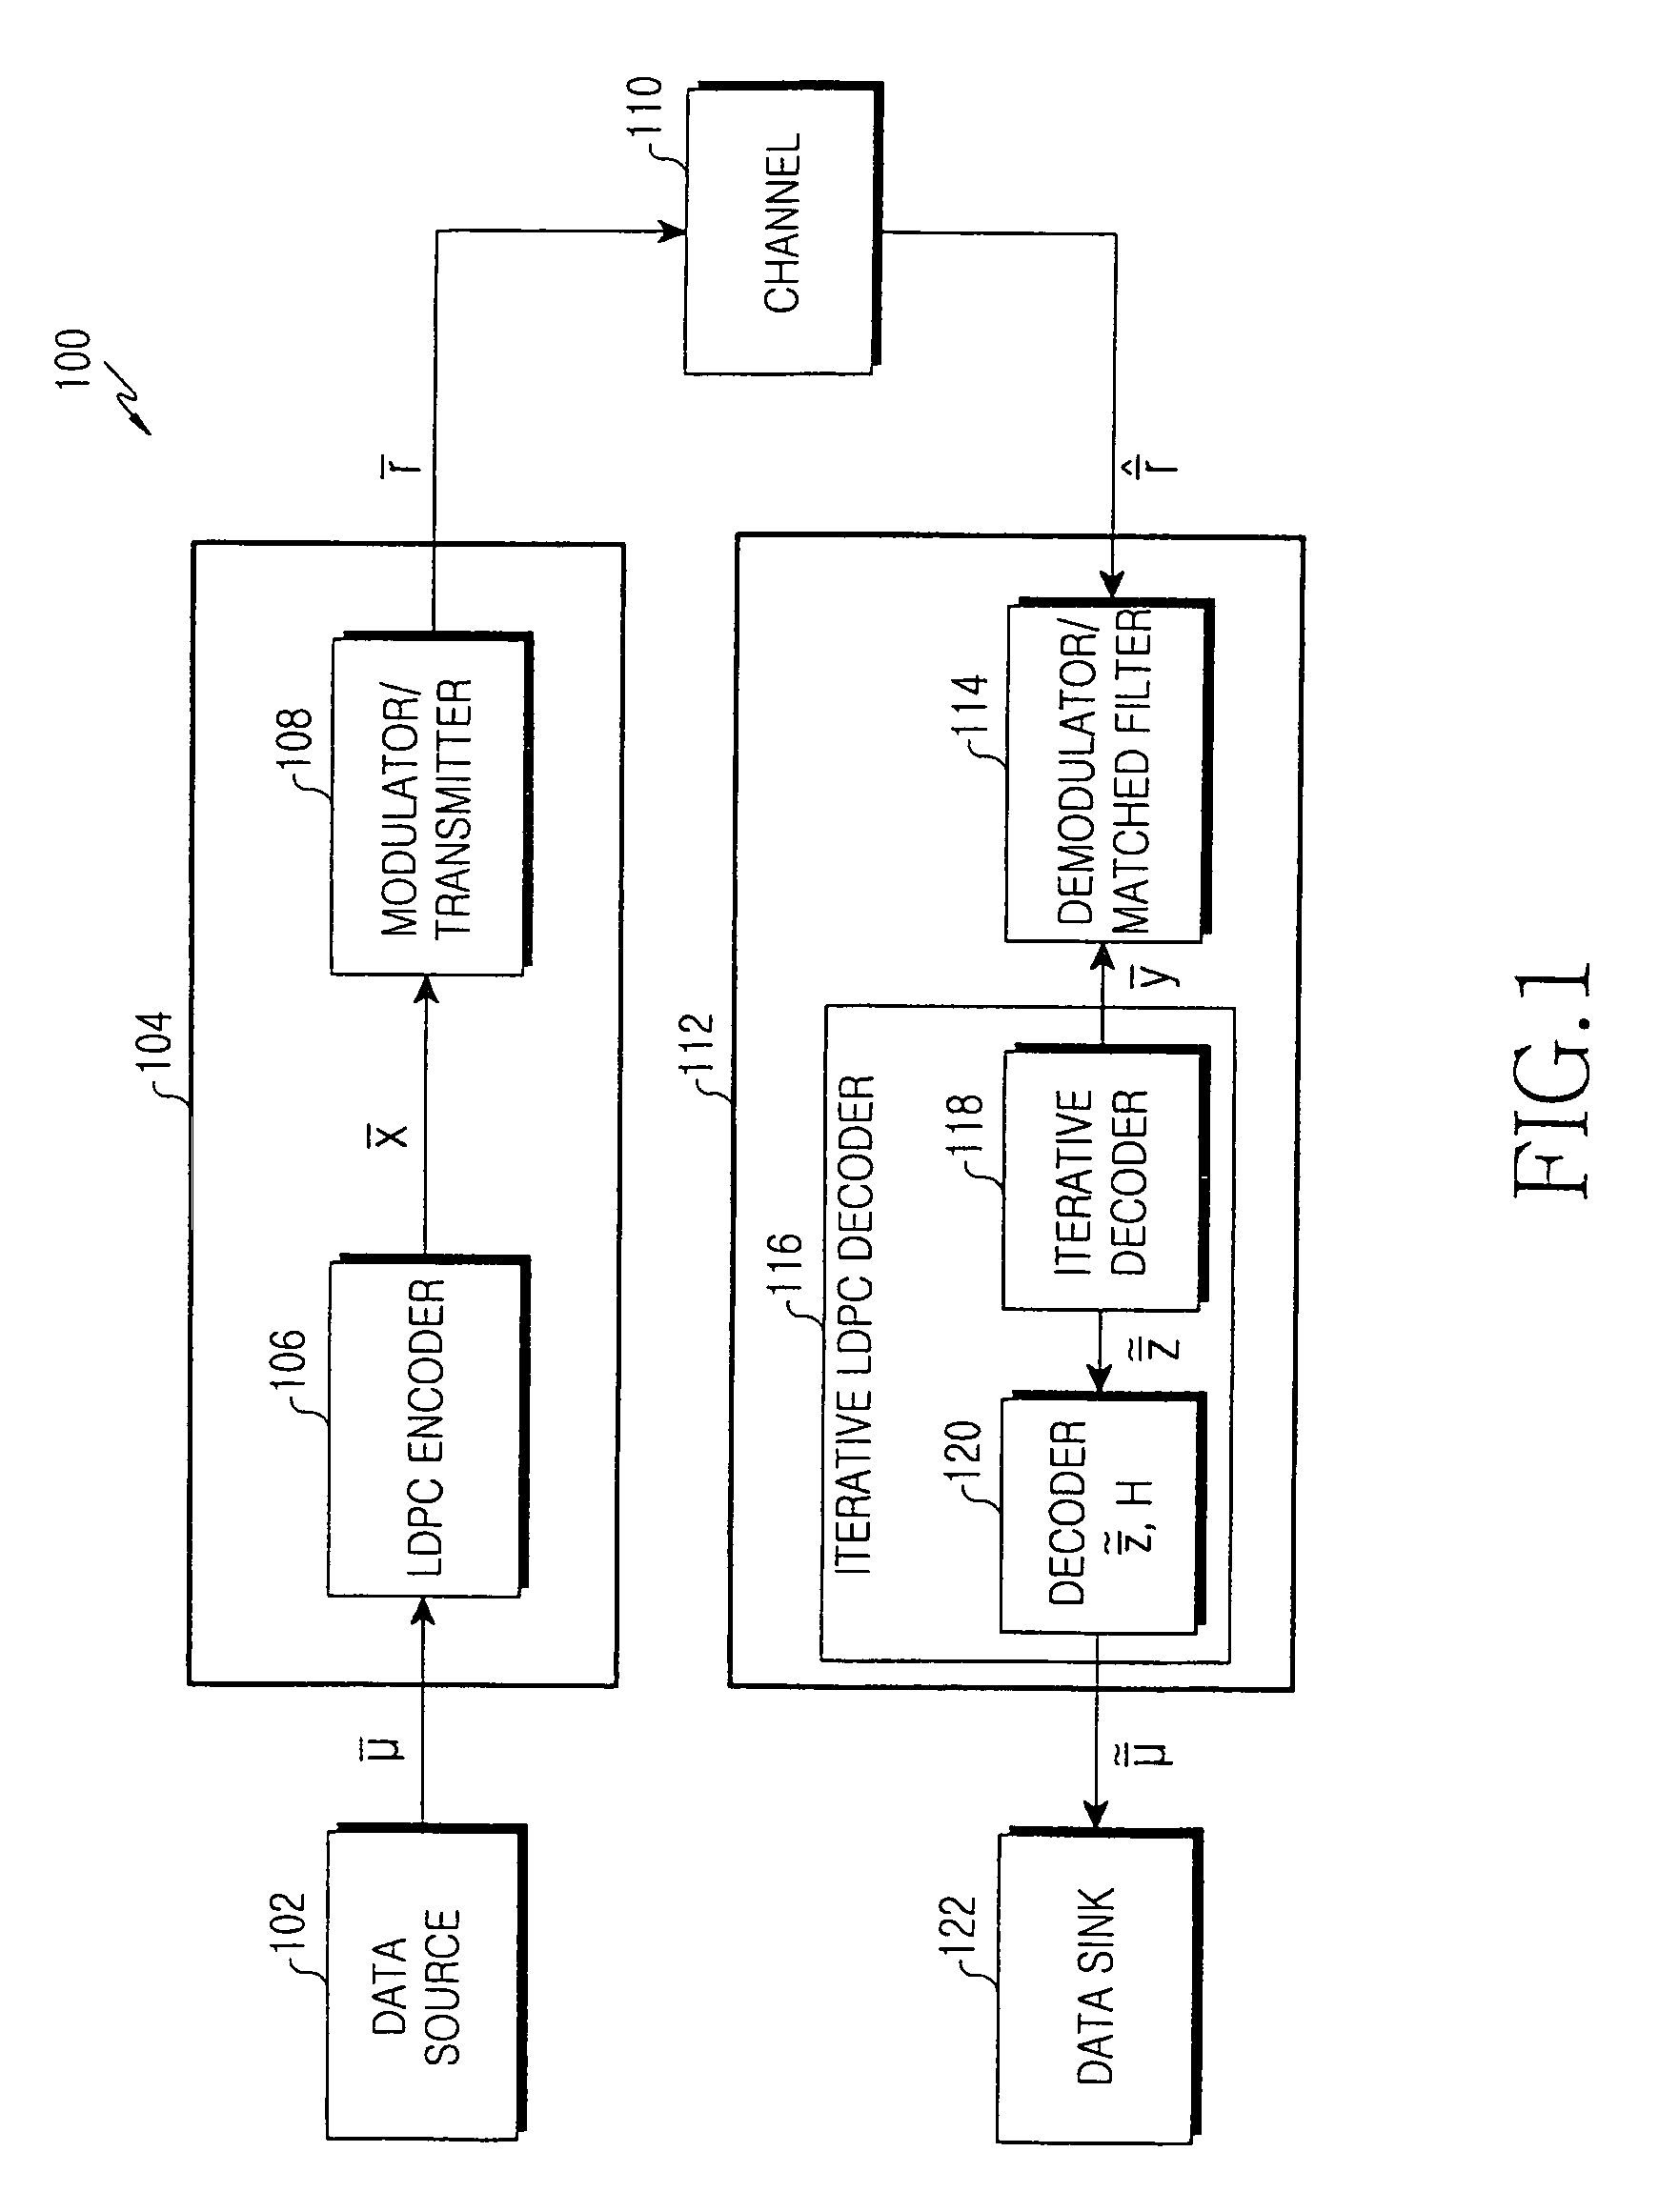 Apparatus and method for receiving signal in a communication system using a low density parity check code